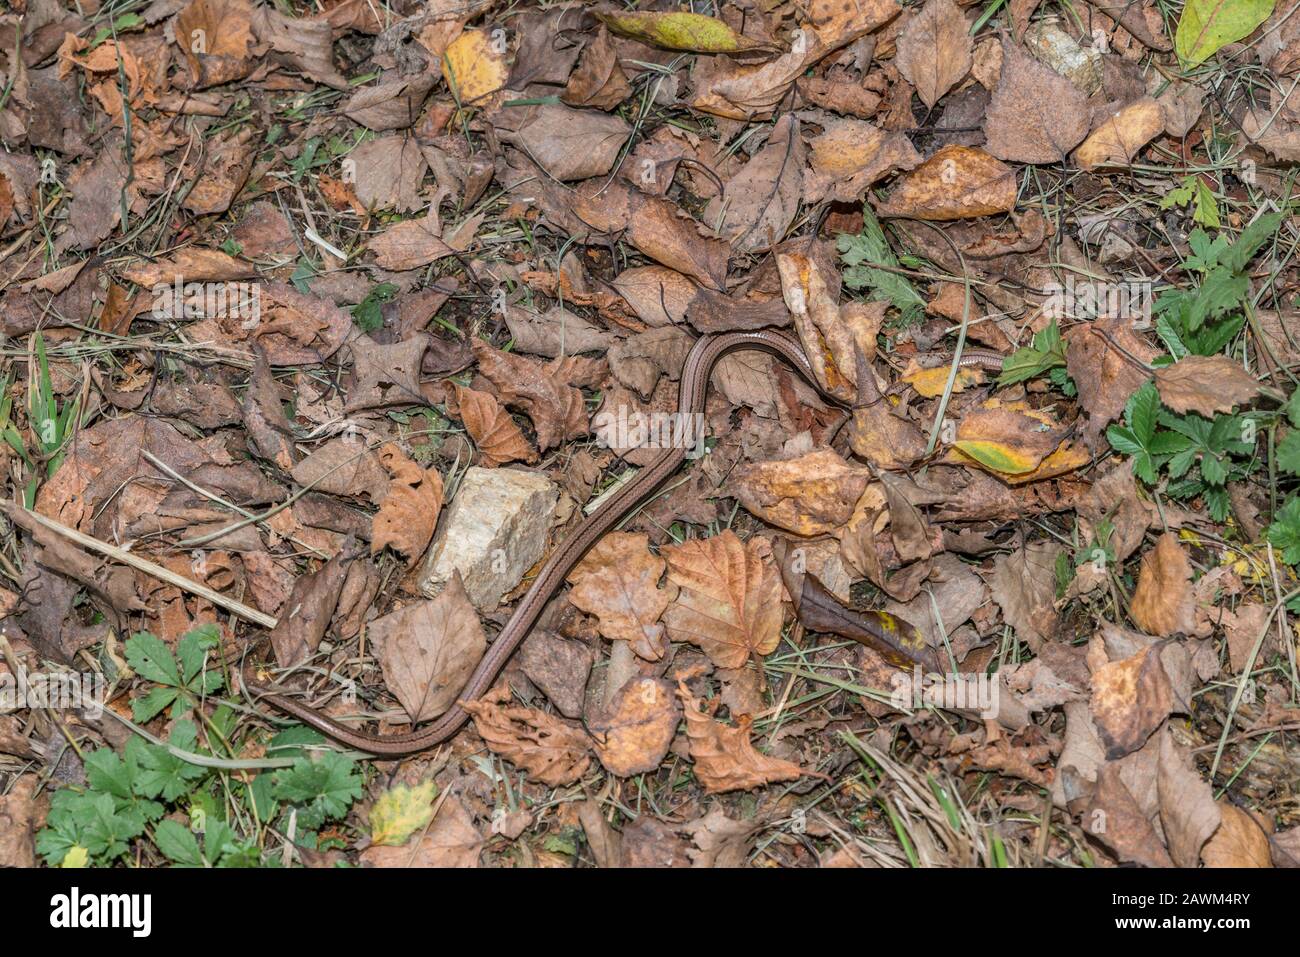 Close-up of a blindworm (Anguis fragilis) on a leafy ground in a forest, Germany Stock Photo